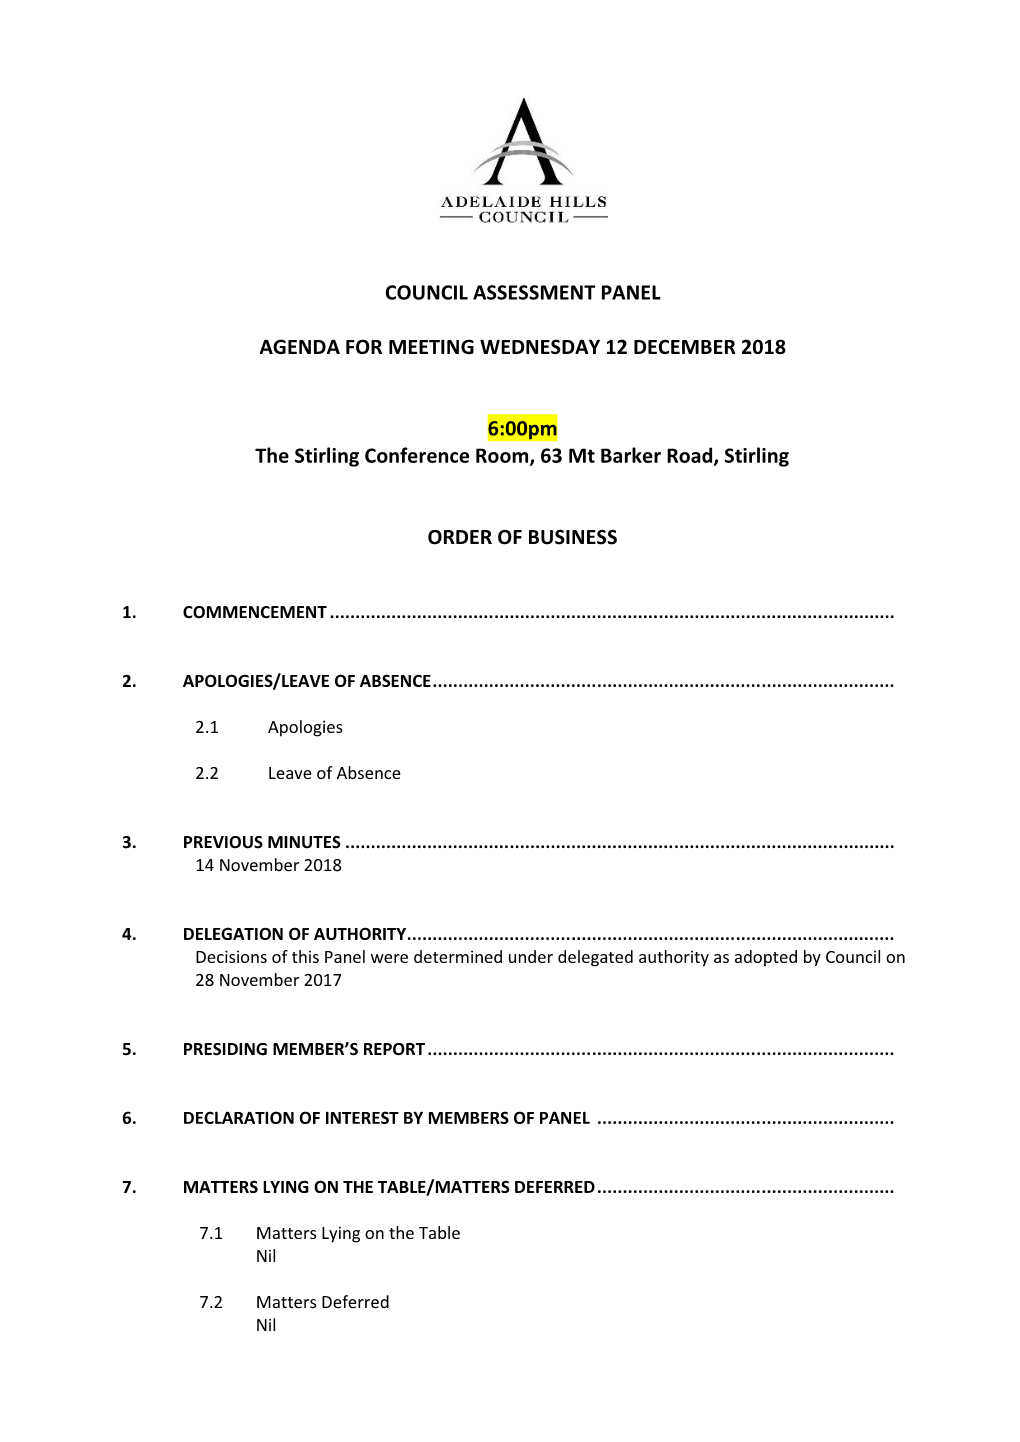 Council Assessment Panel Agenda for Meeting